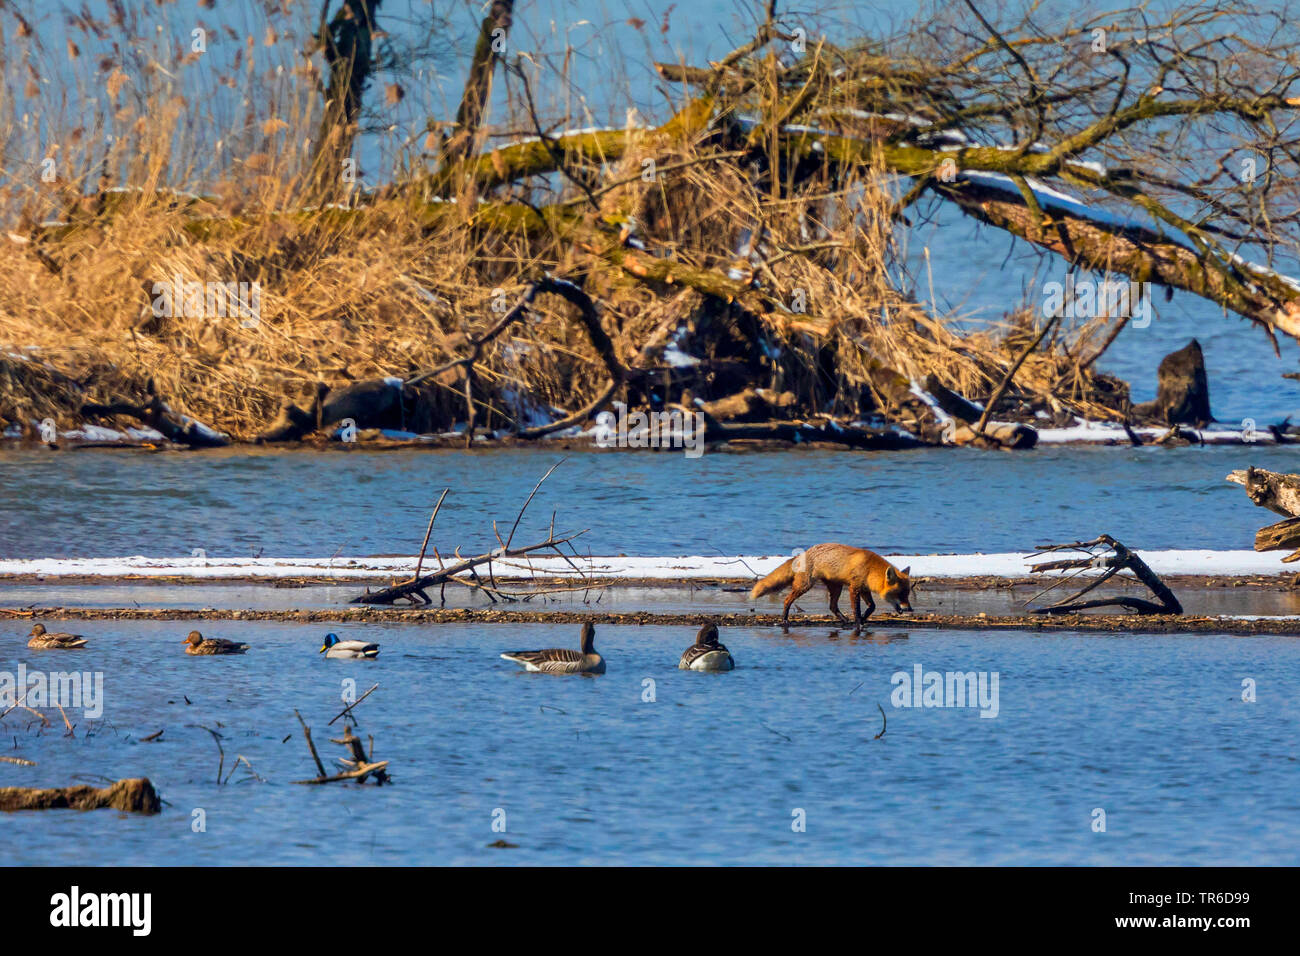 red fox (Vulpes vulpes), stalking through shallow water, with mallards and greylag geese, Germany, Bavaria, Lake Chiemsee Stock Photo